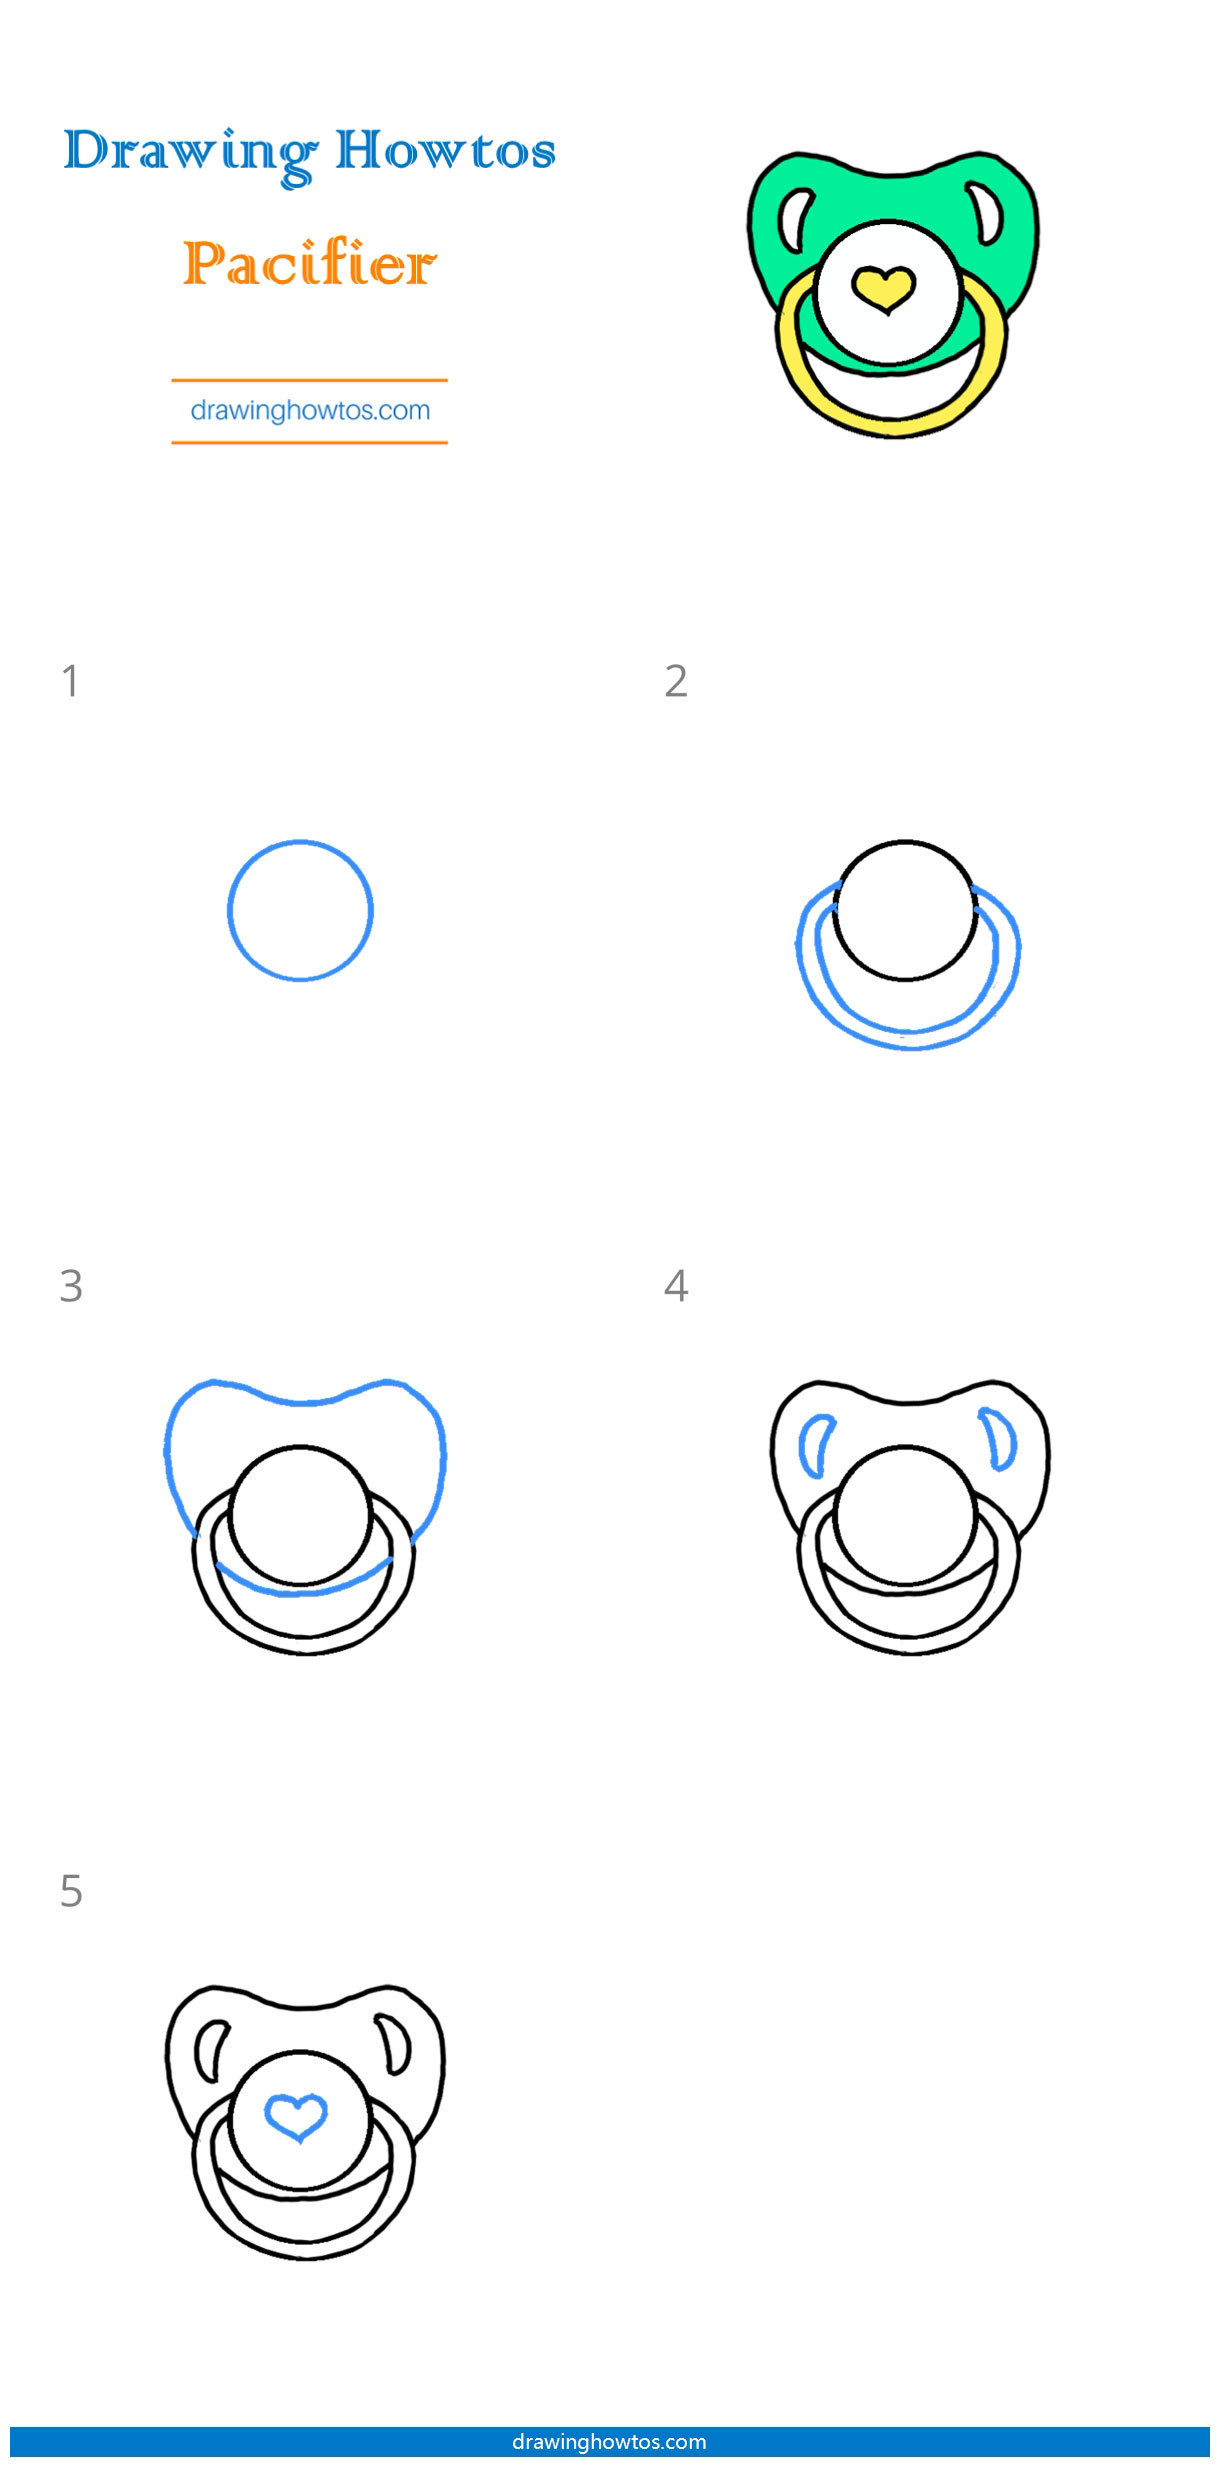 How to Draw a Pacifier Step by Step Easy Drawing Guides Drawing Howtos